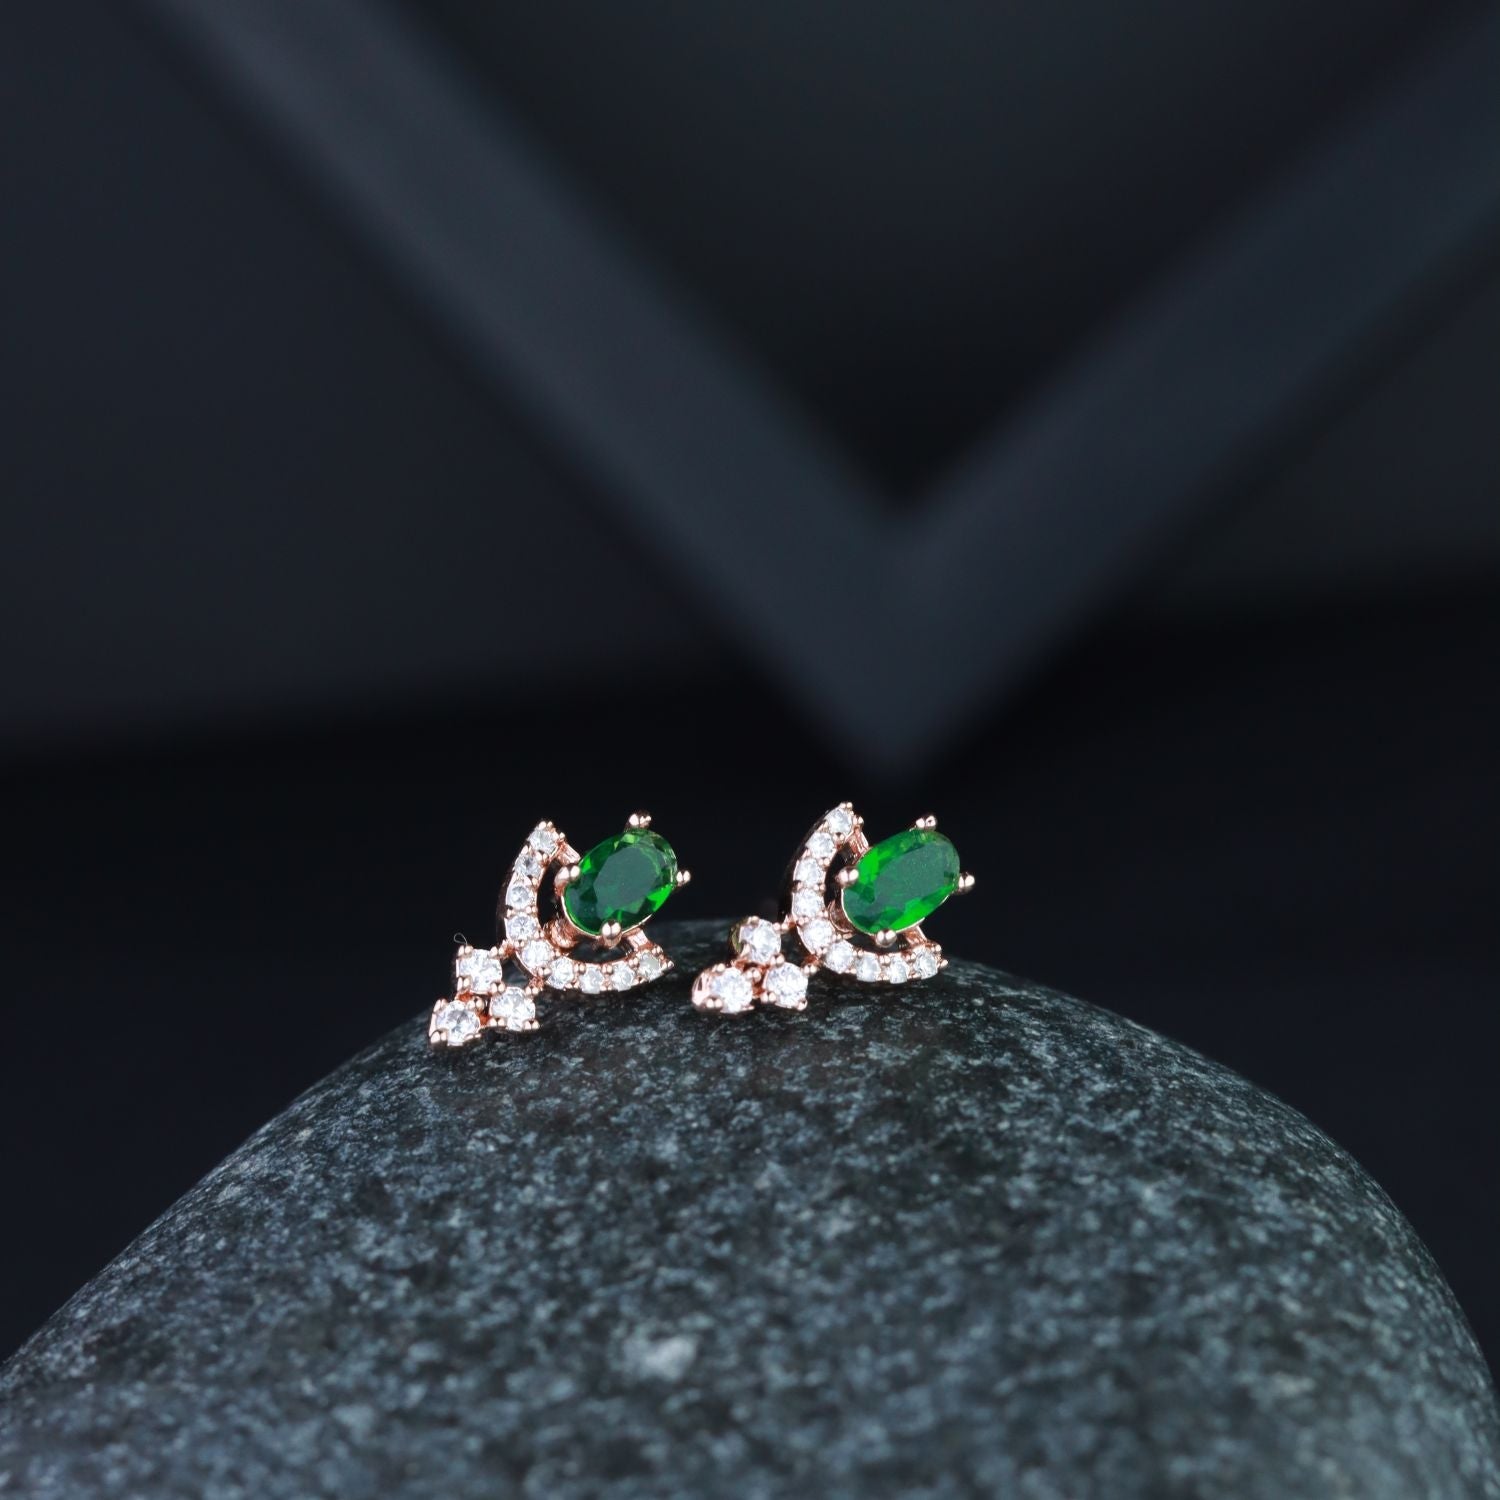 Women's Valentine'S Special 18K Rose Gold Plated Green Cz & American Diamond Beautiful Studs Earrings (E3068G) - I Jewels